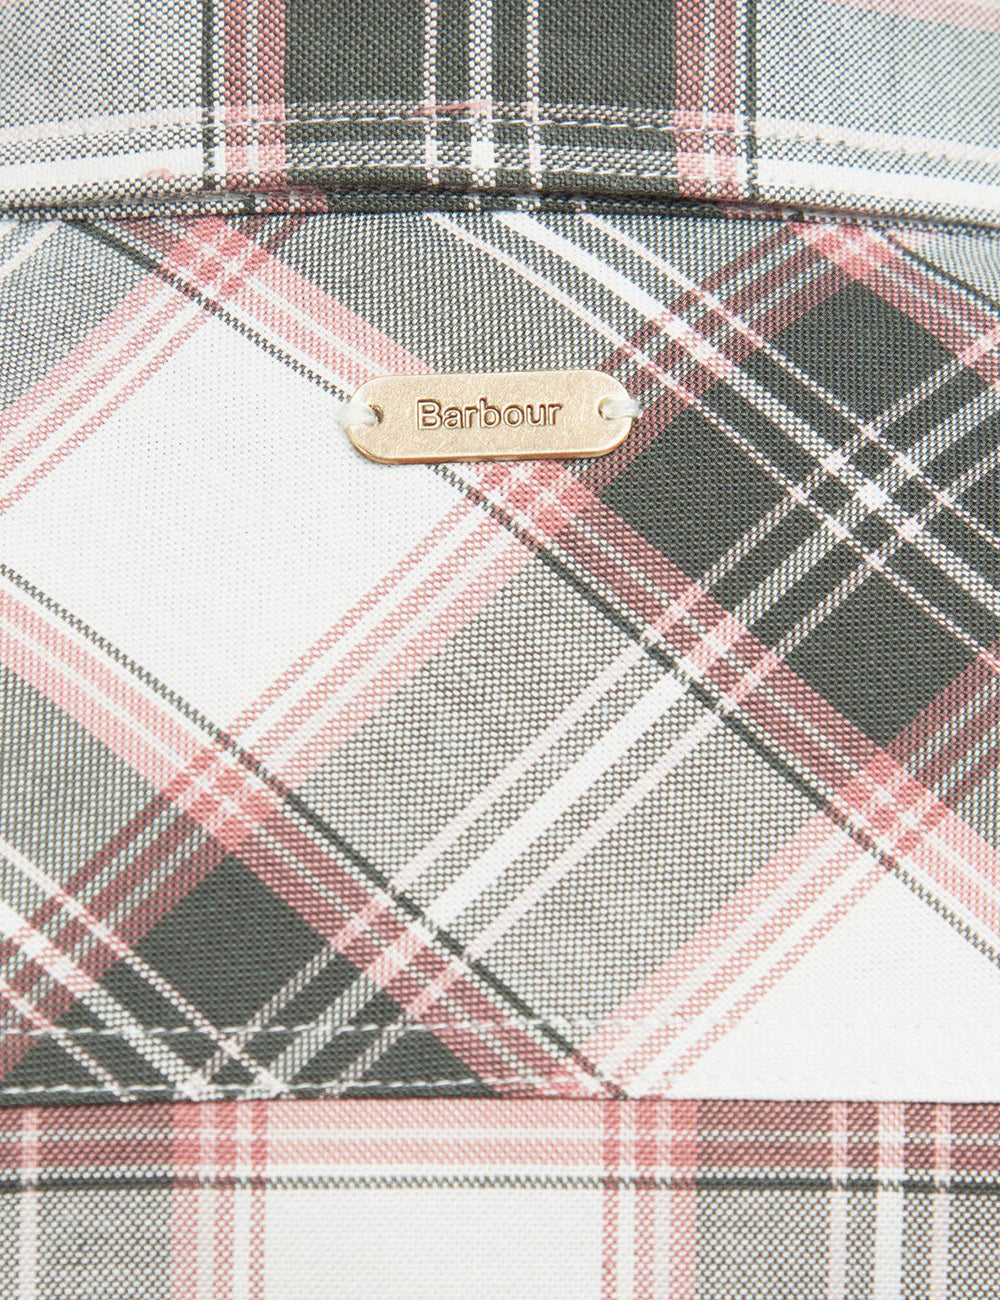 Barbour metal ID bar on the back of the Daphne Shirt